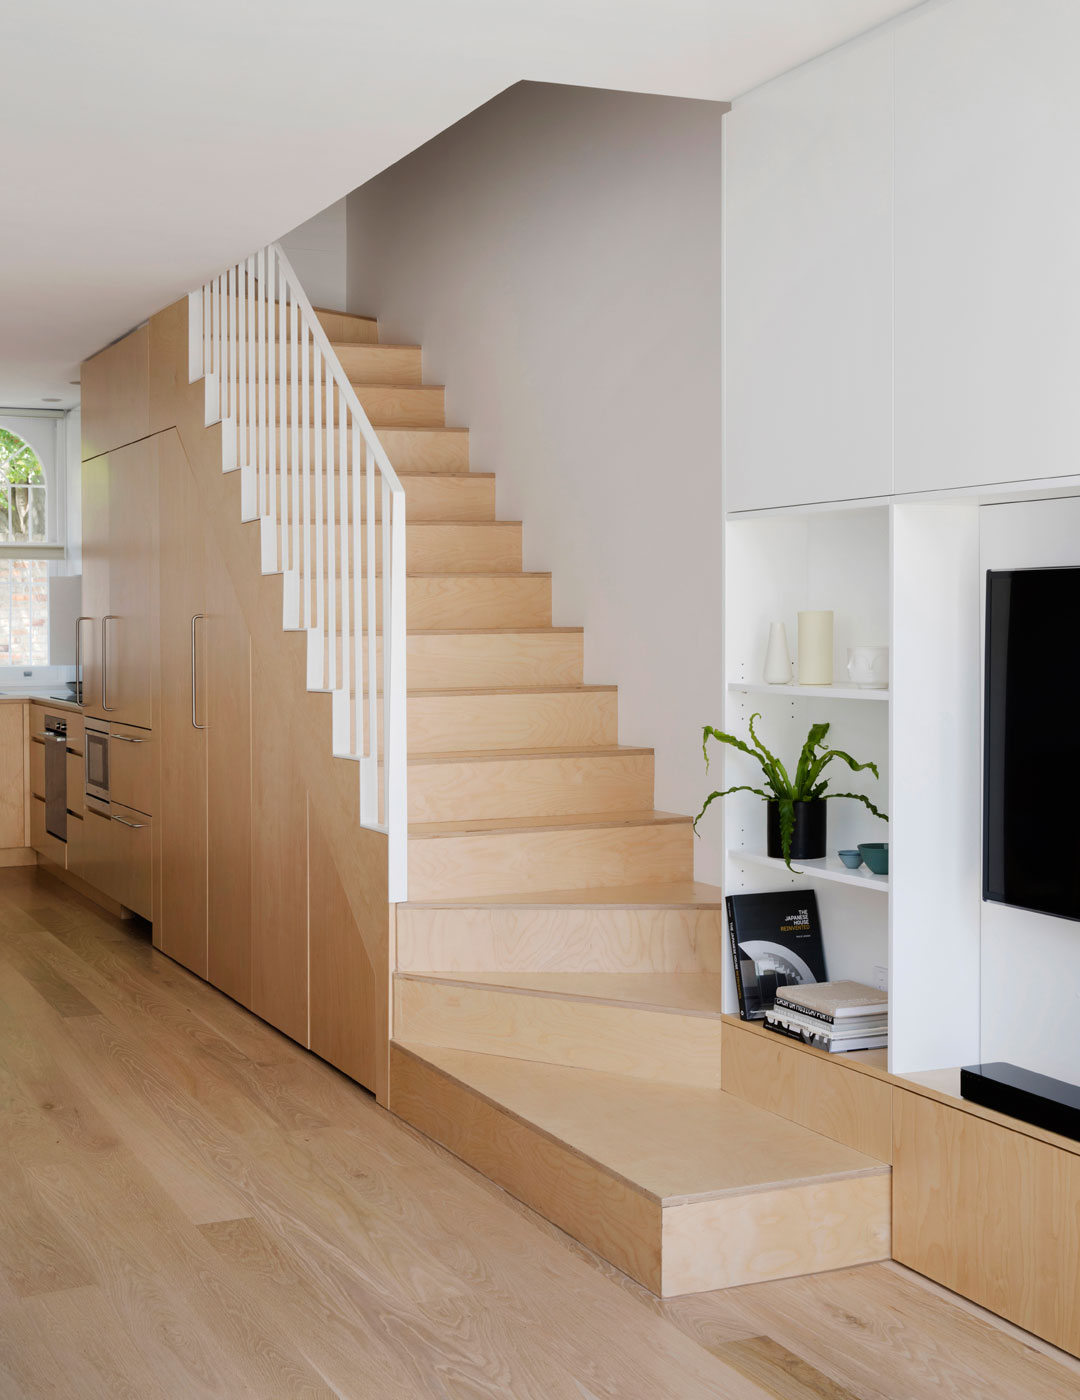 pgr projects contemporary renovation interior staircase